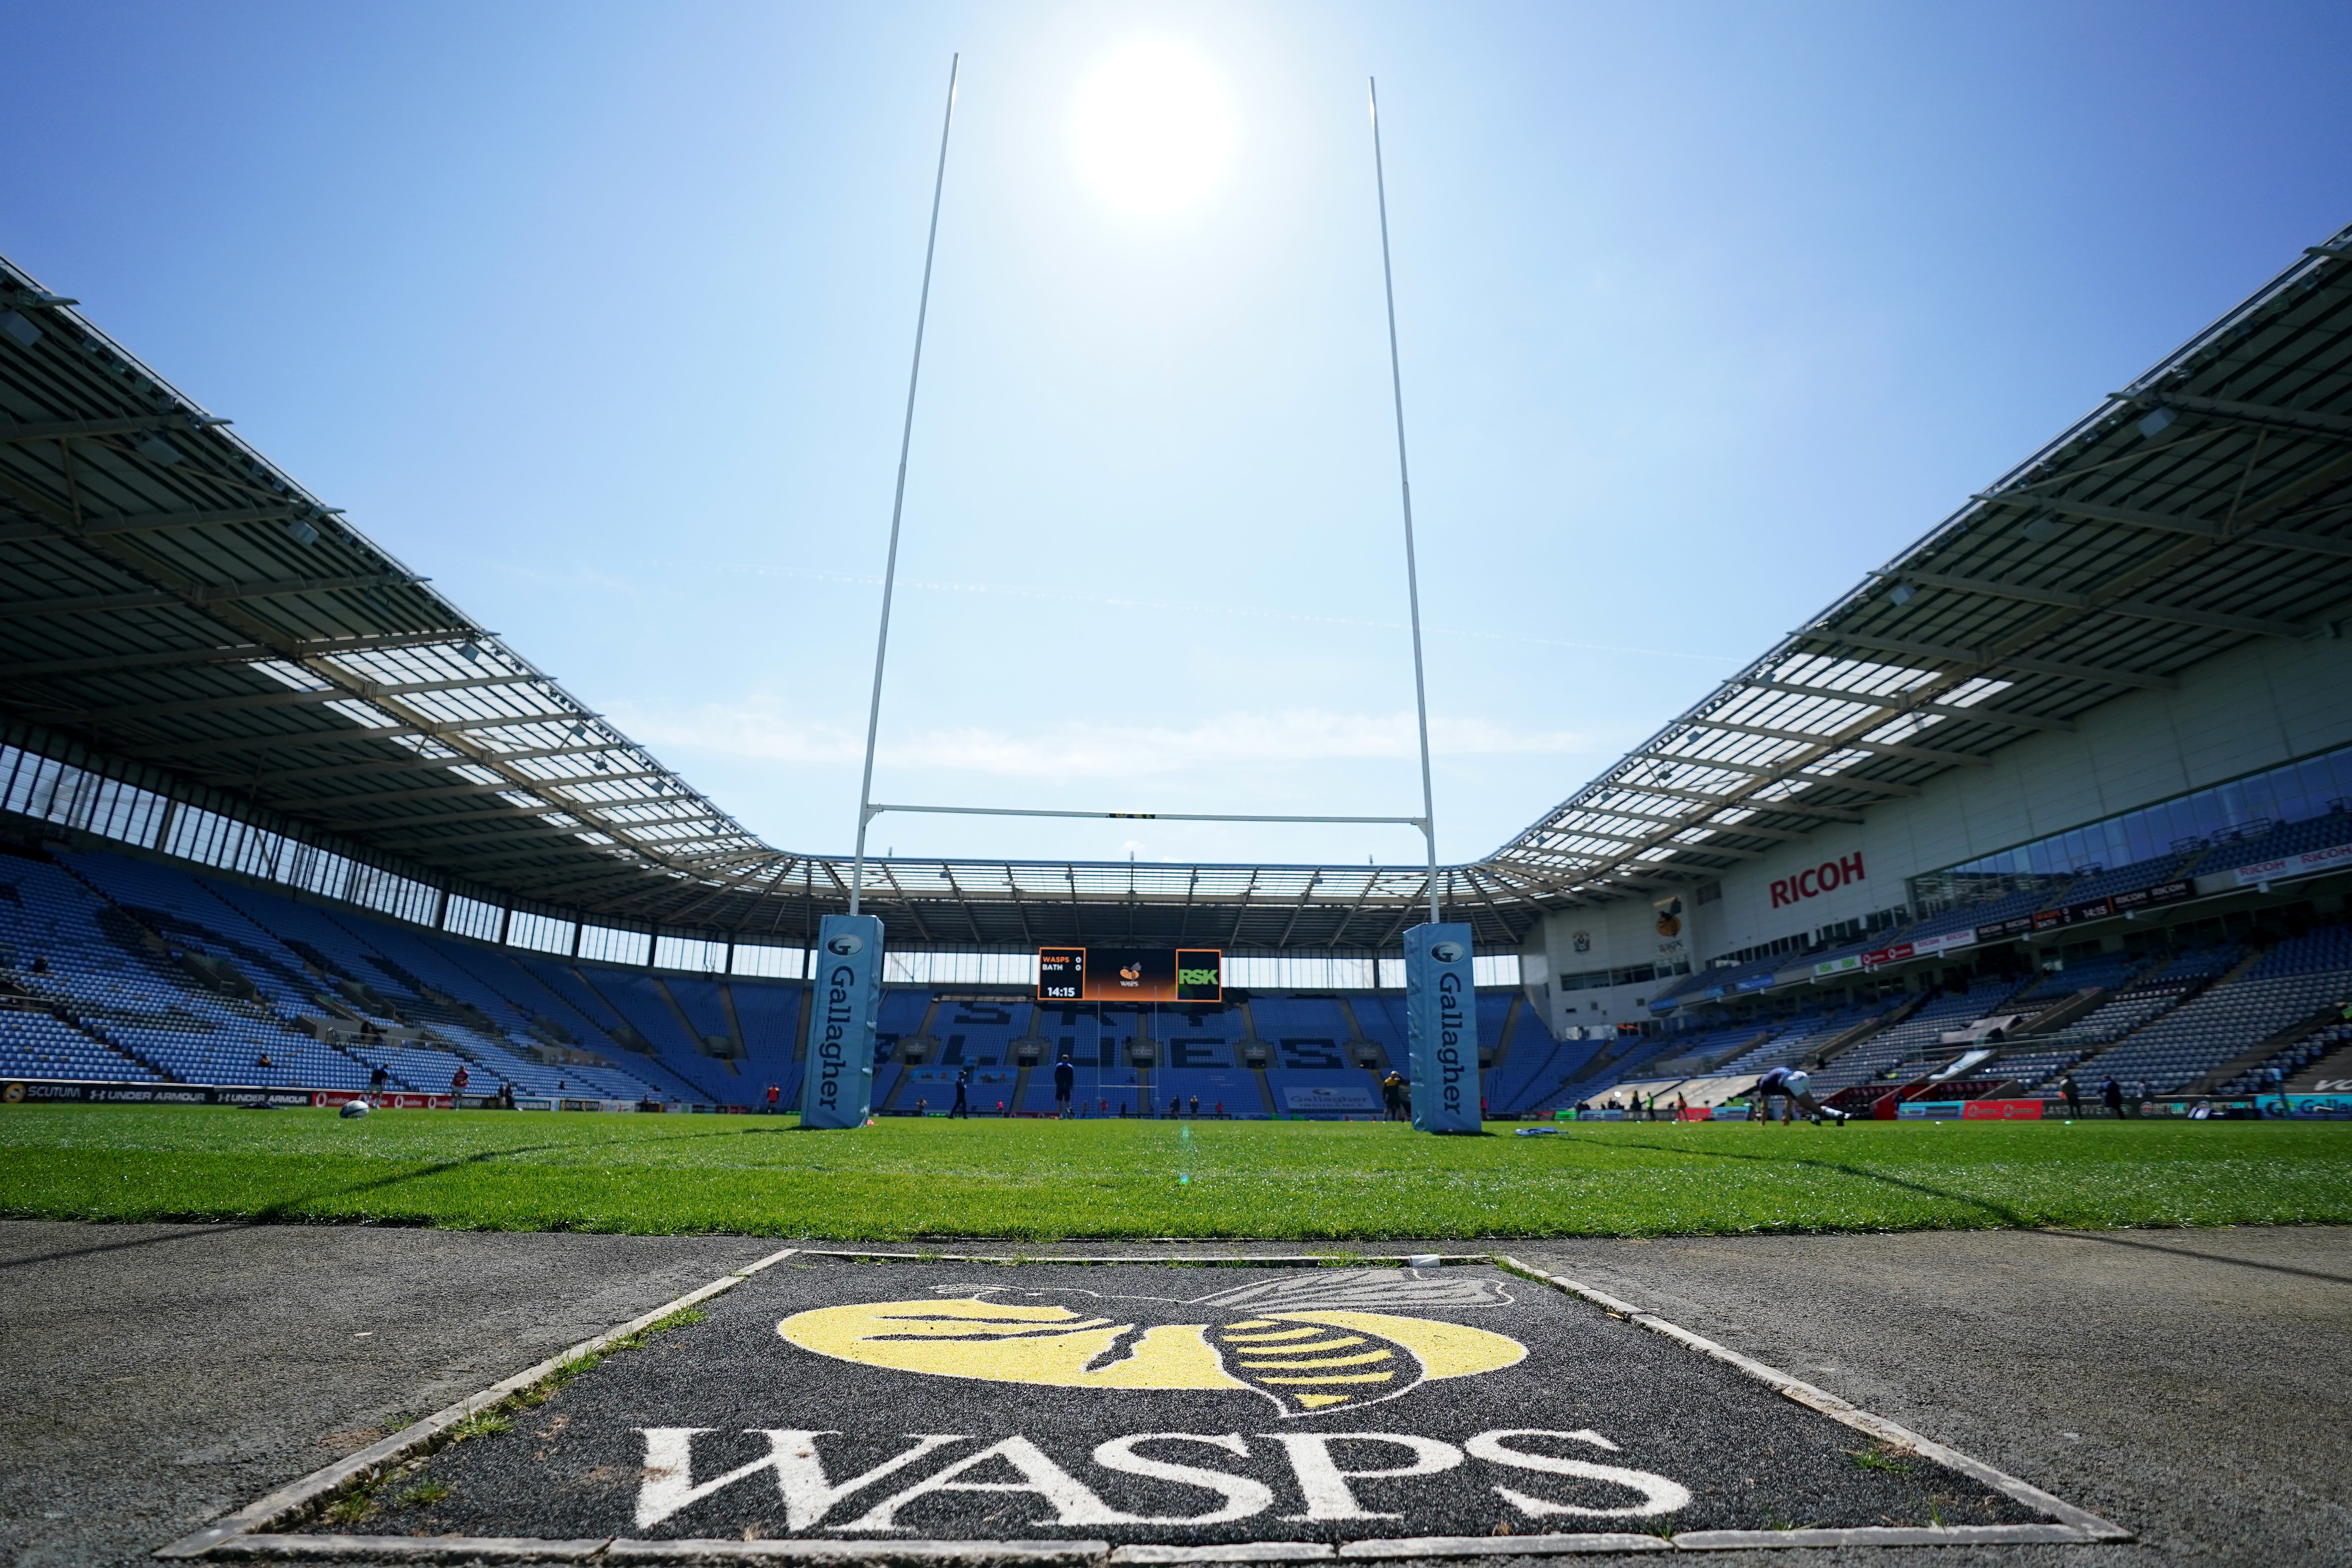 Wasps have made Coventry’s stadium, pictured, their home since 2014 (Zac Goodwin/PA)